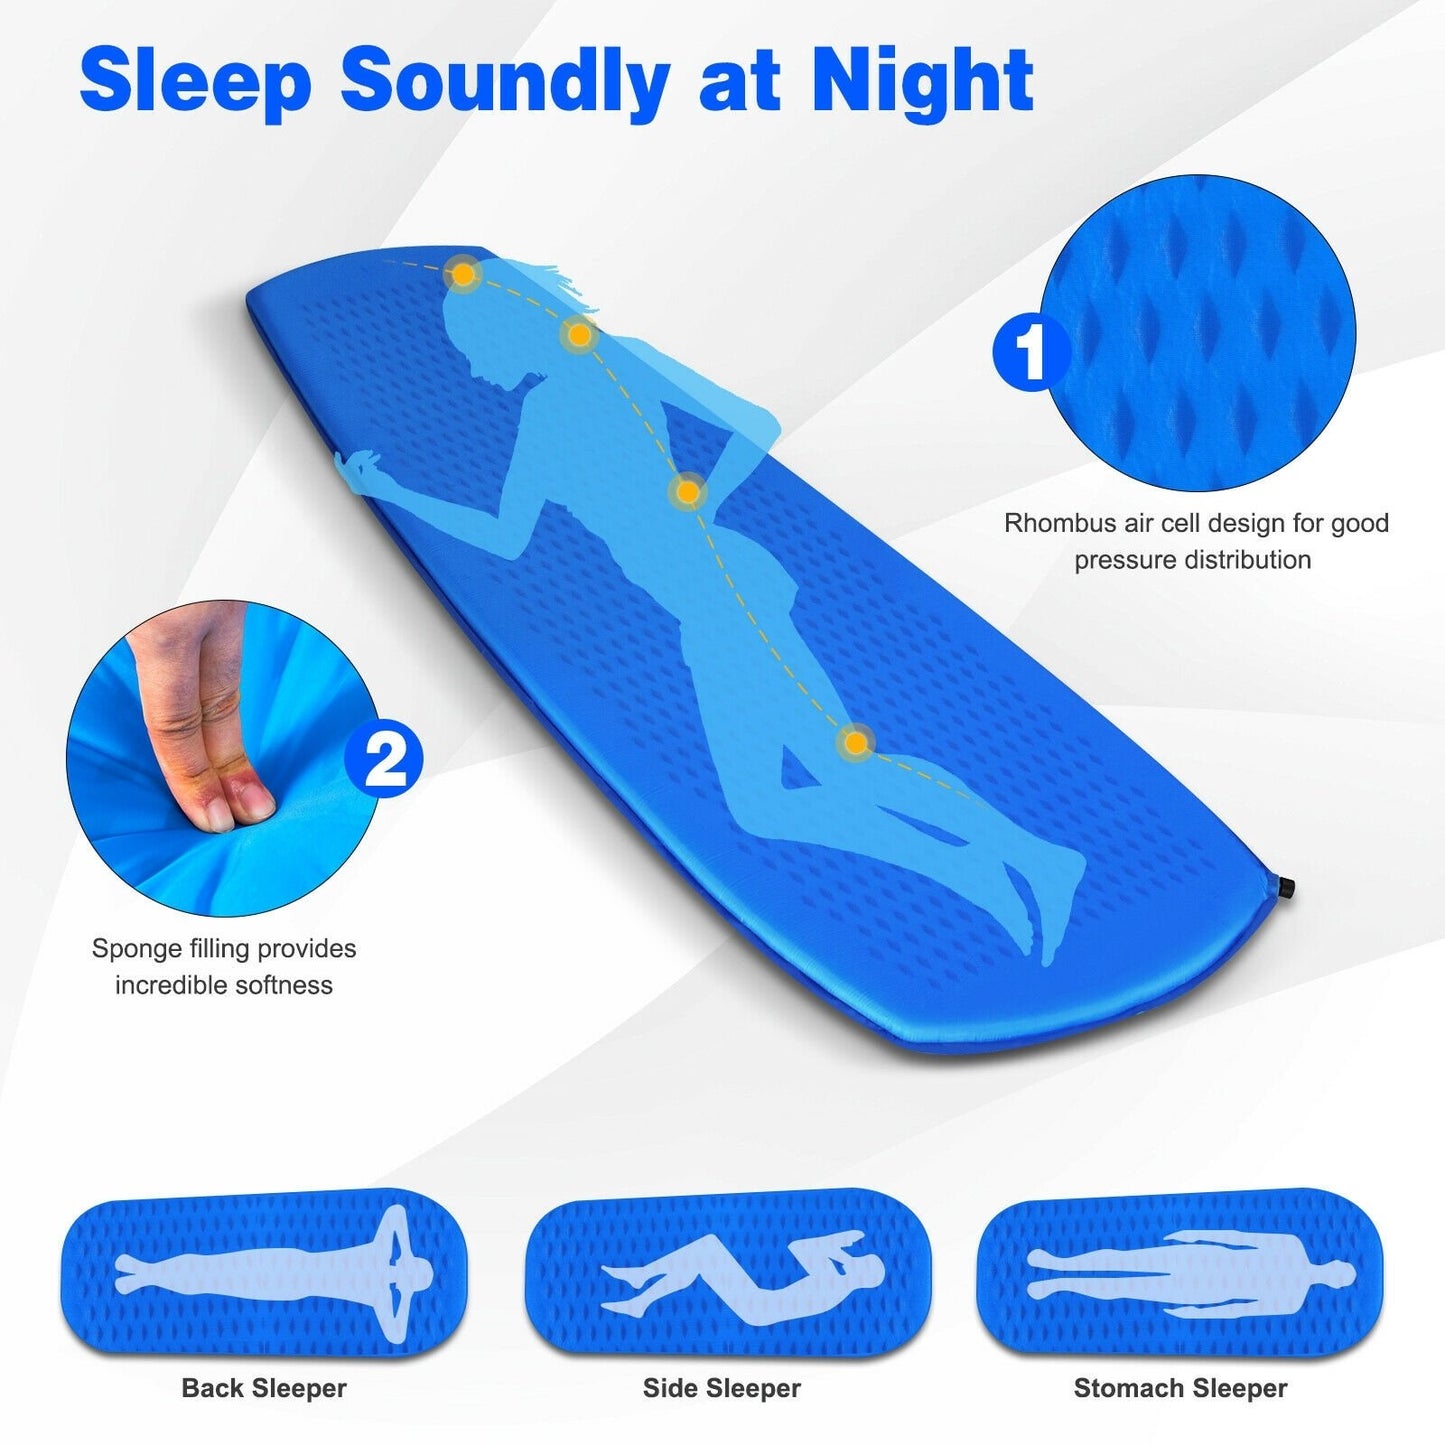 Inflatable Sleeping Pad with Carrying Bag, Blue